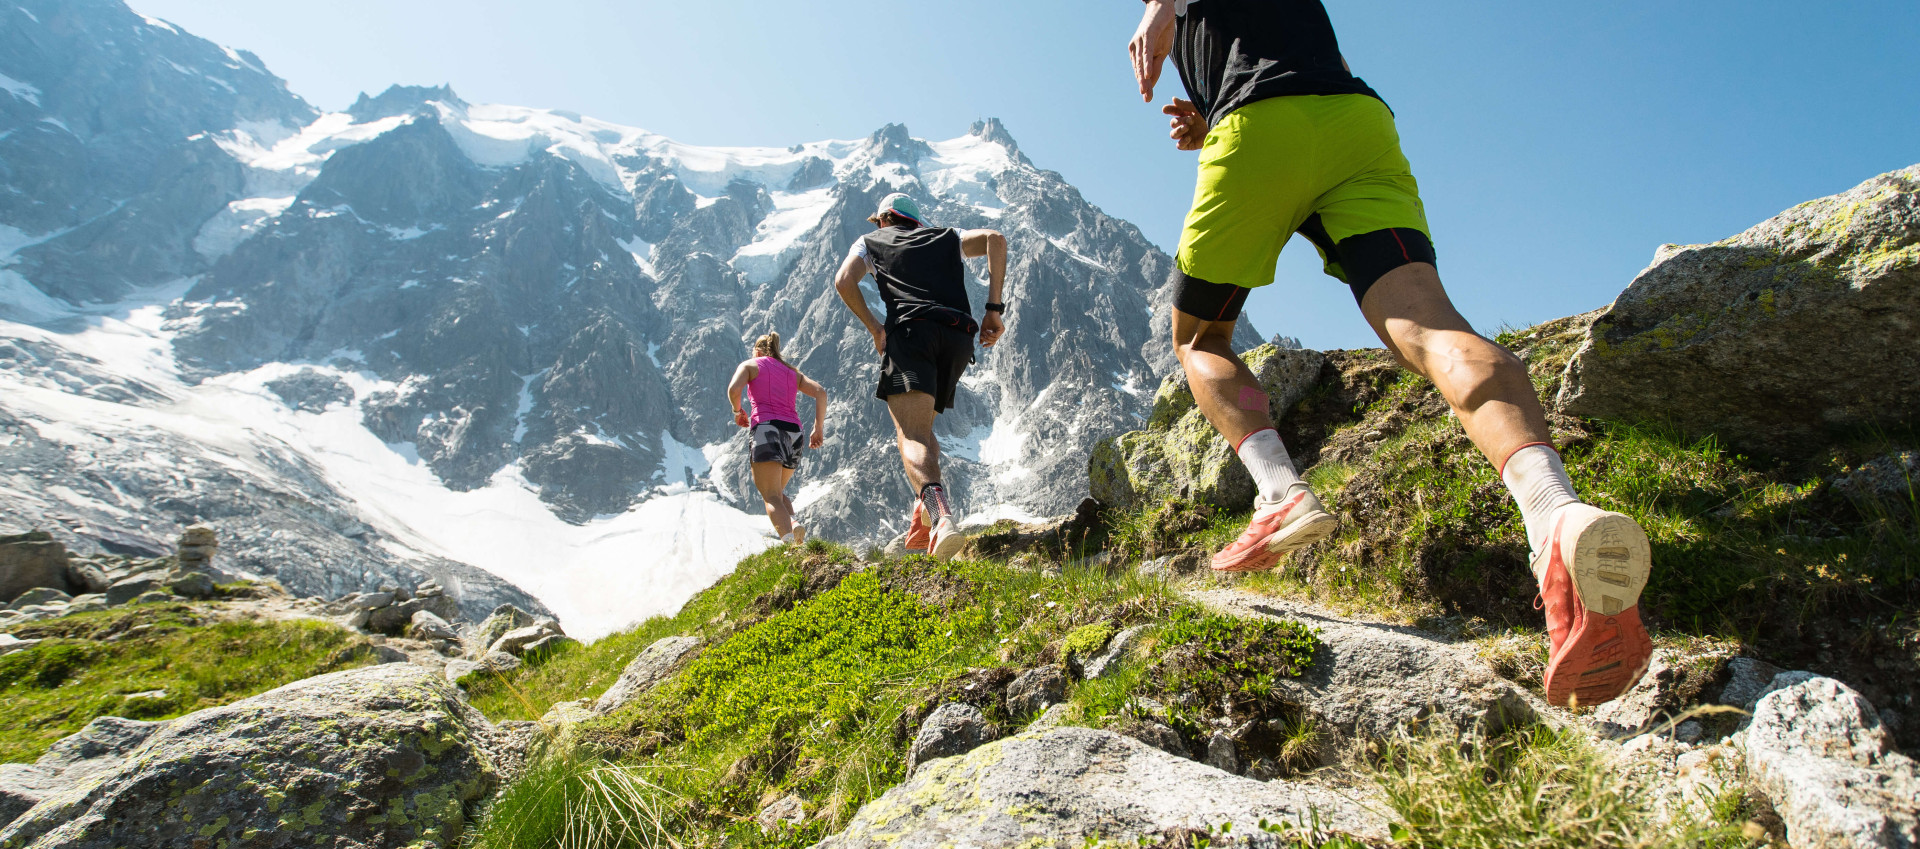 low angle view of three people running across rocks towards a snow-covered mountain